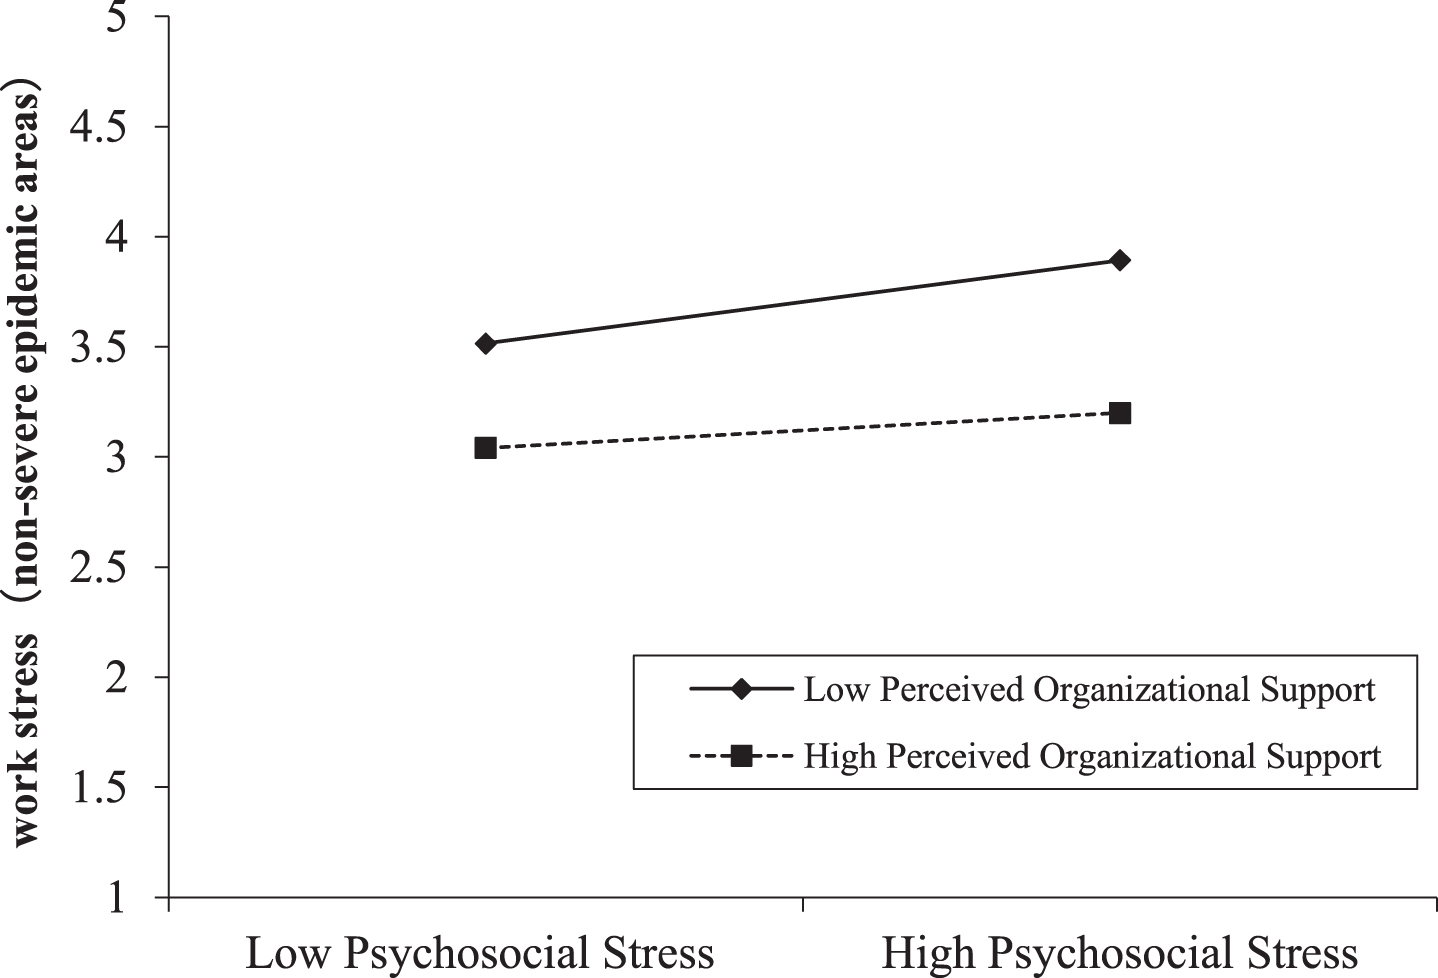 Moderating effect of perceived organizational support between psychosocial stress and work stress in non-severe epidemic areas.